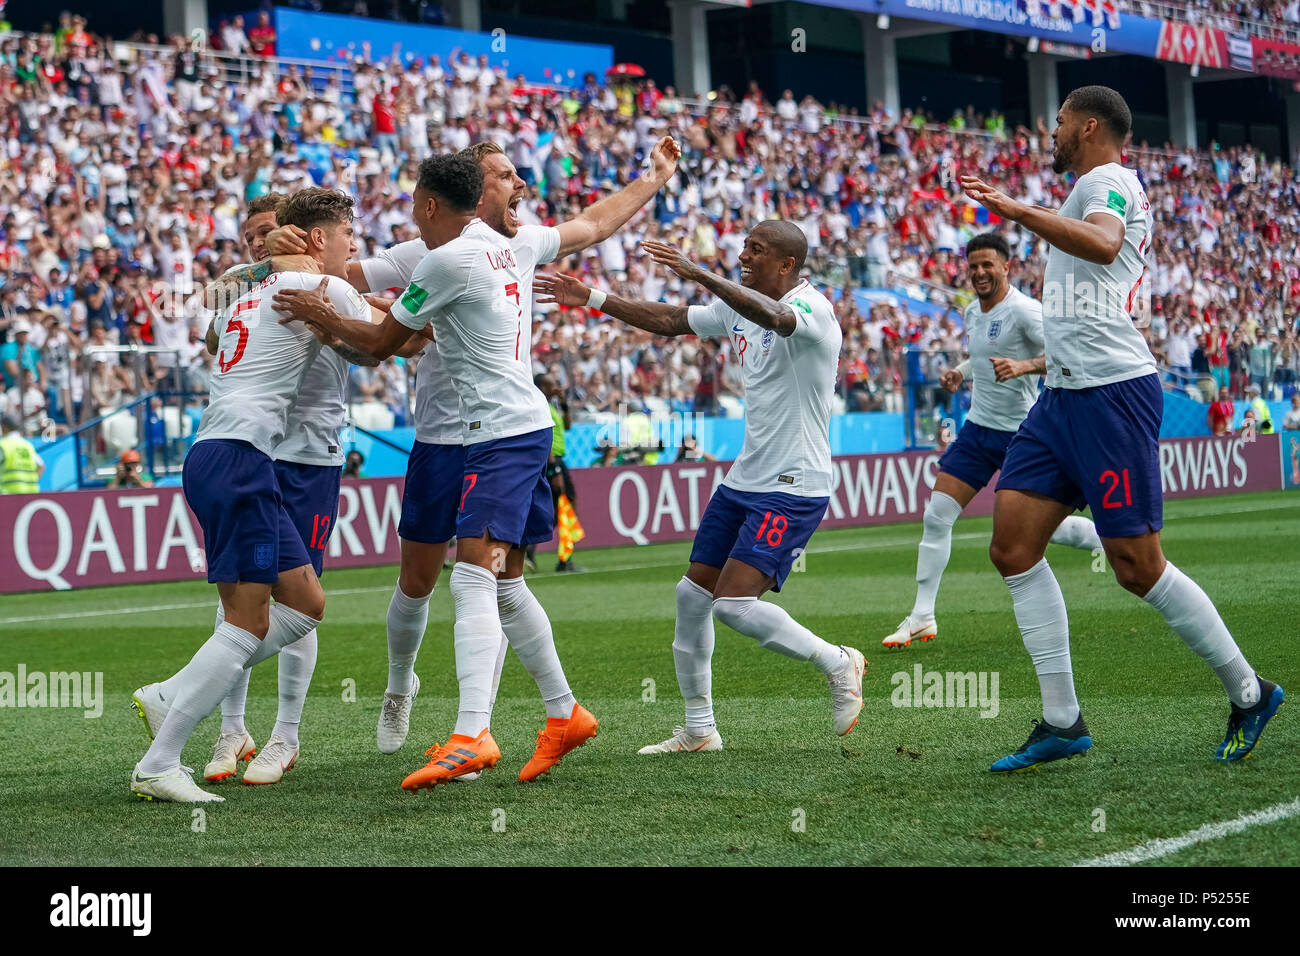 Nizhny Novgorod Stadium, Nizhny Novgorod, Russia. 24th June 2018. FIFA World Cup Football, Group G, England versus Panama; John Stones of England and team celebrating the goal for 1-0 in the 8th minute Credit: Action Plus Sports Images/Alamy Live News Stock Photo